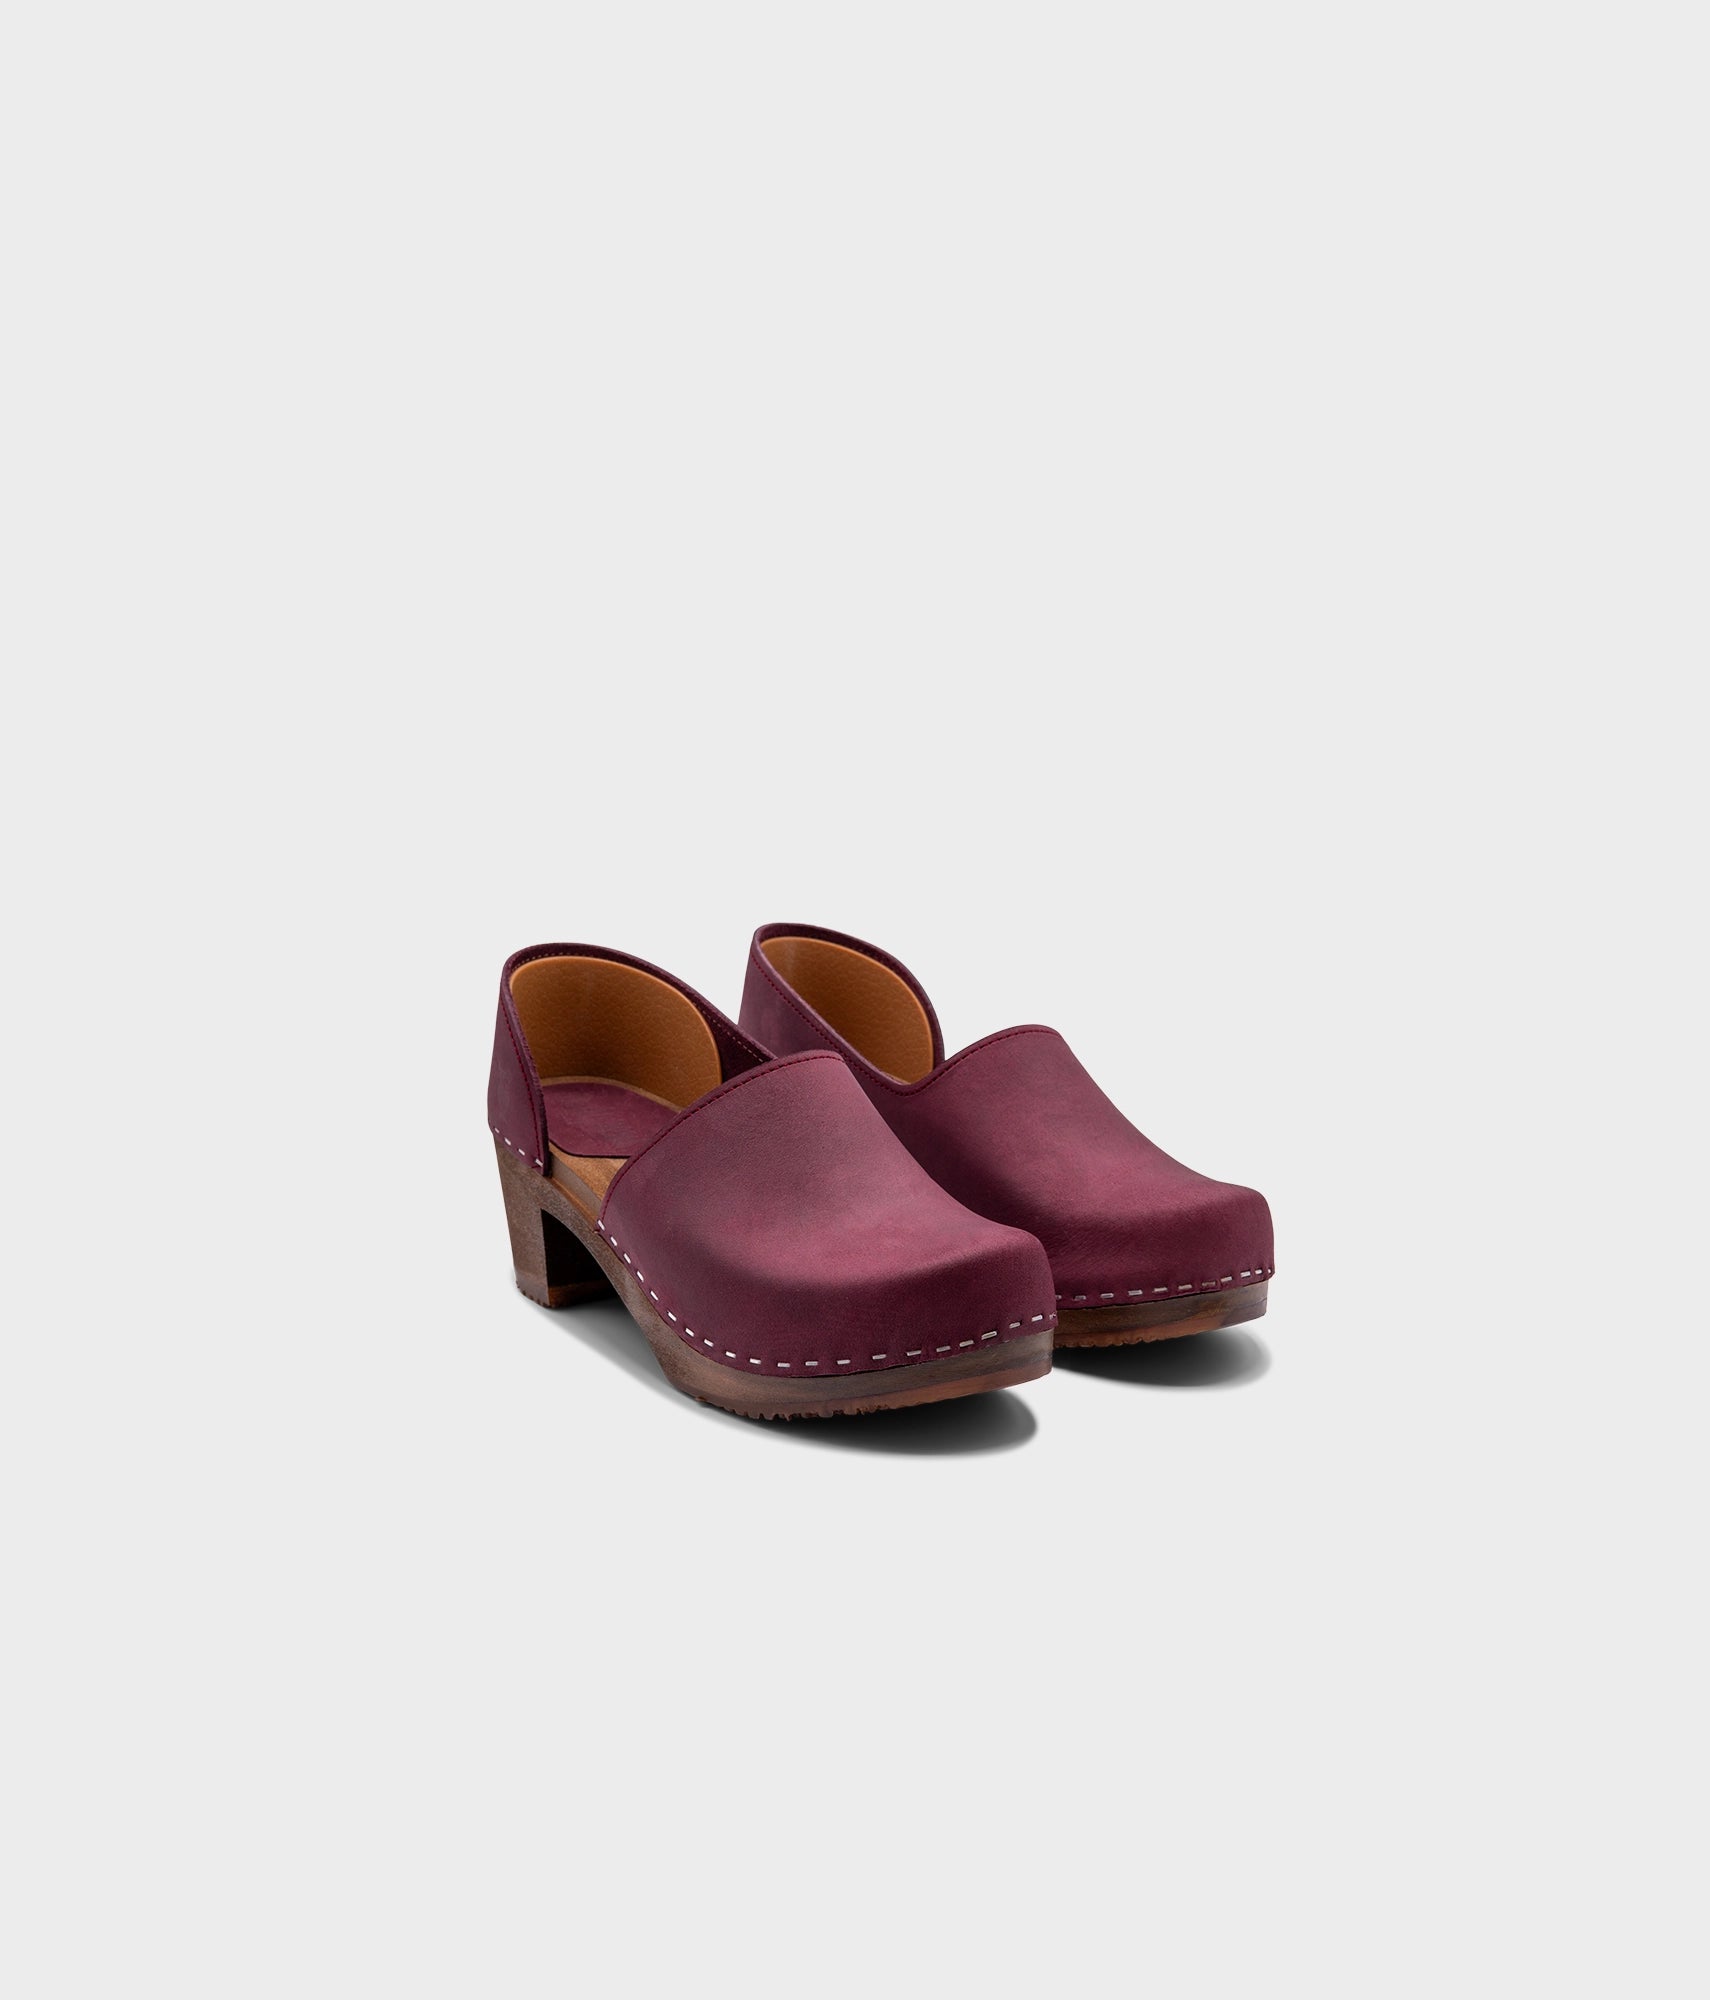 high heeled closed-back clogs in purple plum nubuck leather stapled on a dark wooden base